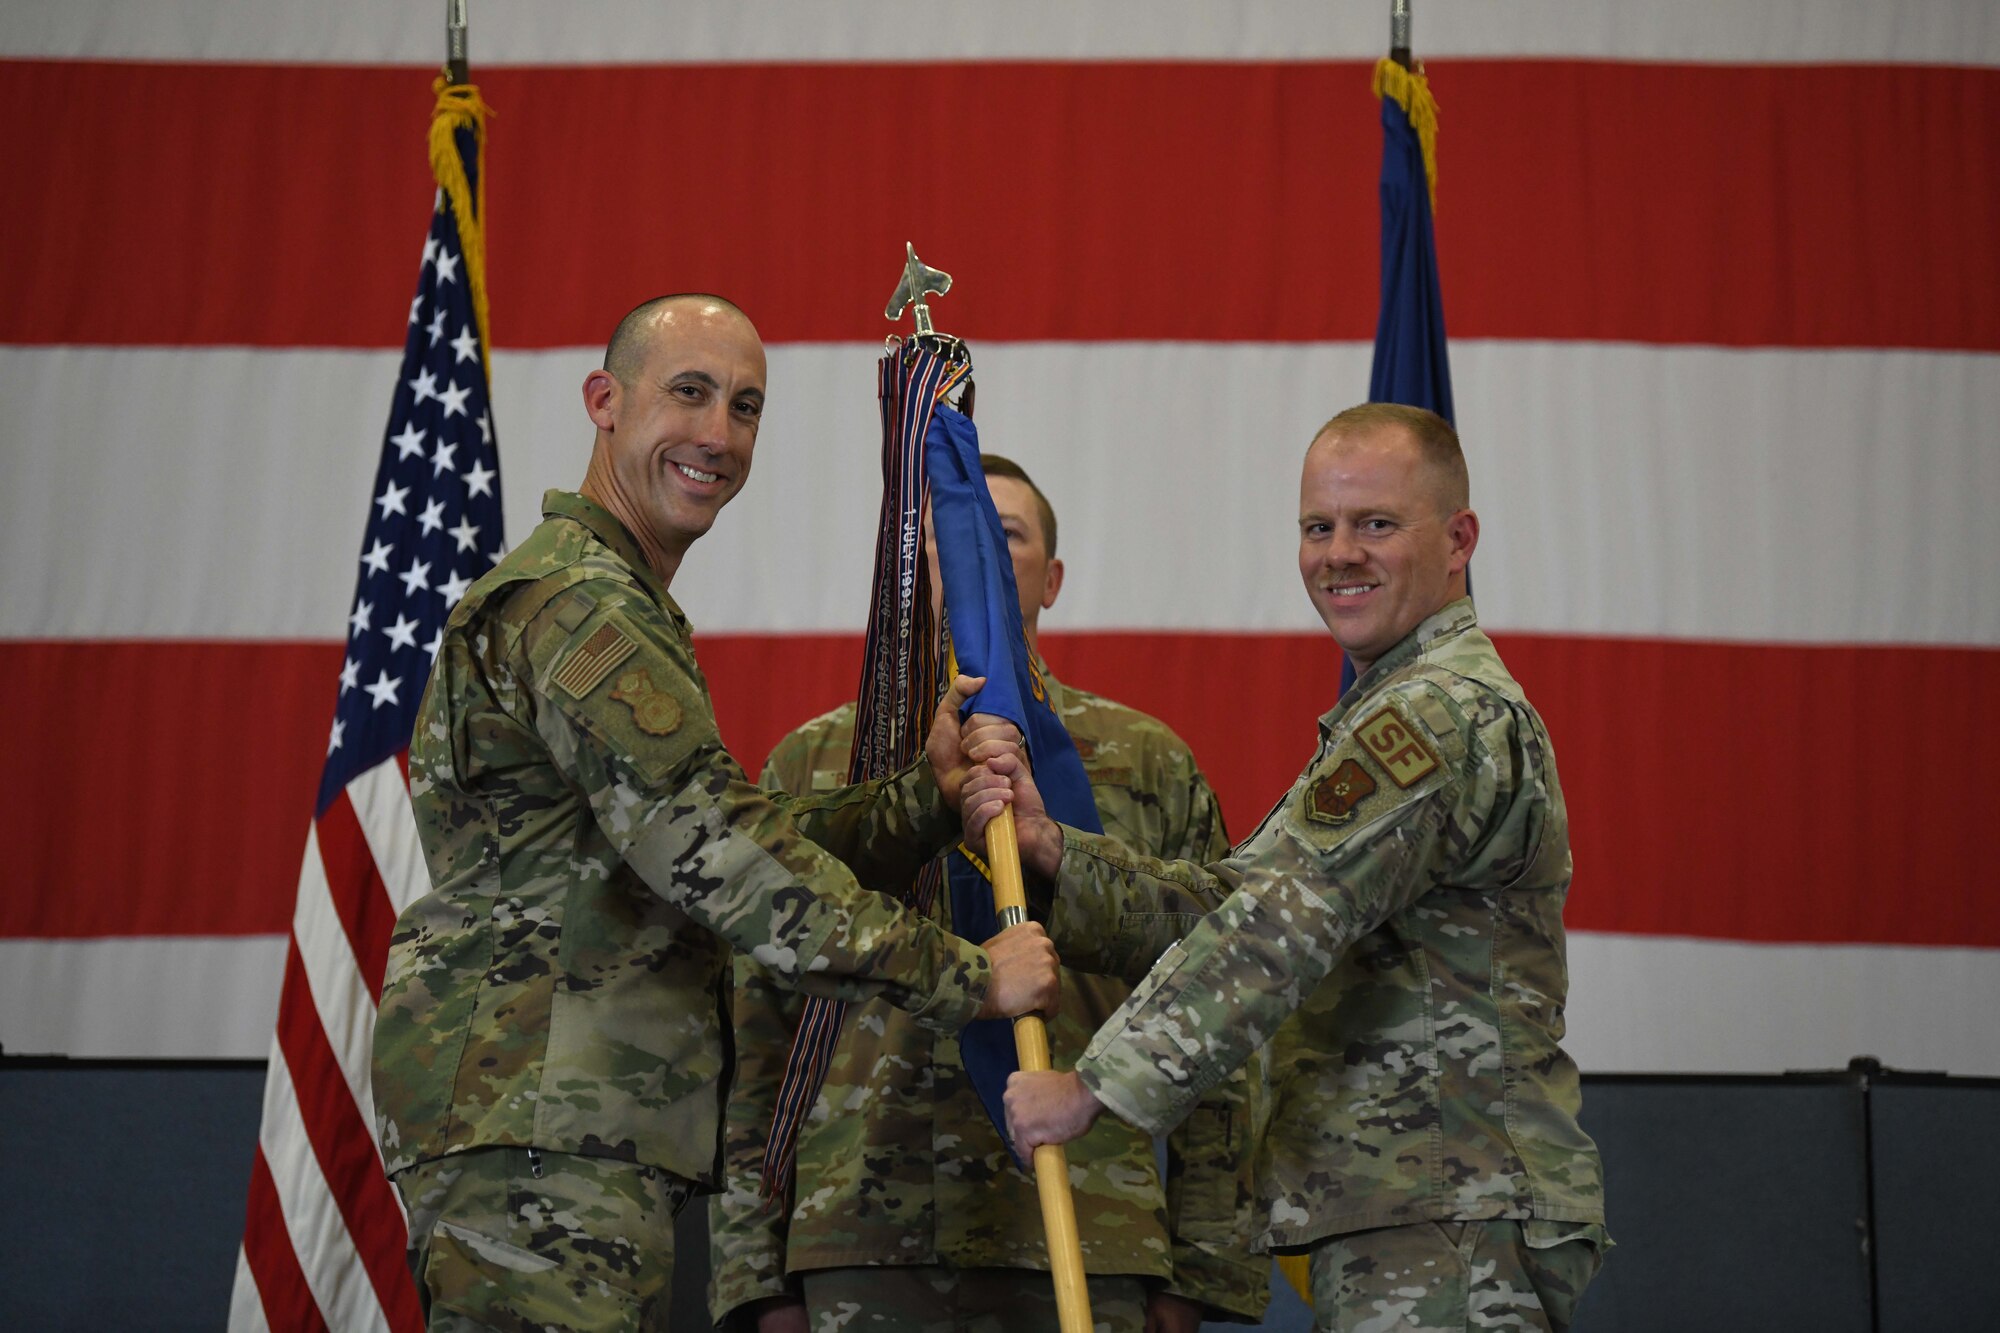 Col. Damian Schlussel, commander of the 90th Security Forces Group and Lt. Col. William Brokaw, incoming commander of the 90th Missile Security Forces Squadron, pose for a photo while passing the guidon during the 90 MSFS change of command ceremony in the Peacekeeper High Bay on F.E. Warren Air Force Base, Wyoming, July 13, 2021. The ceremony is to signify the transition of authority from Lt. Col David Celeste, outgoing commander of the 90th Missile Security Forces Squadron, to Brokaw. (U.S. Air Force photo by Airman 1st Class Darius Frazier)